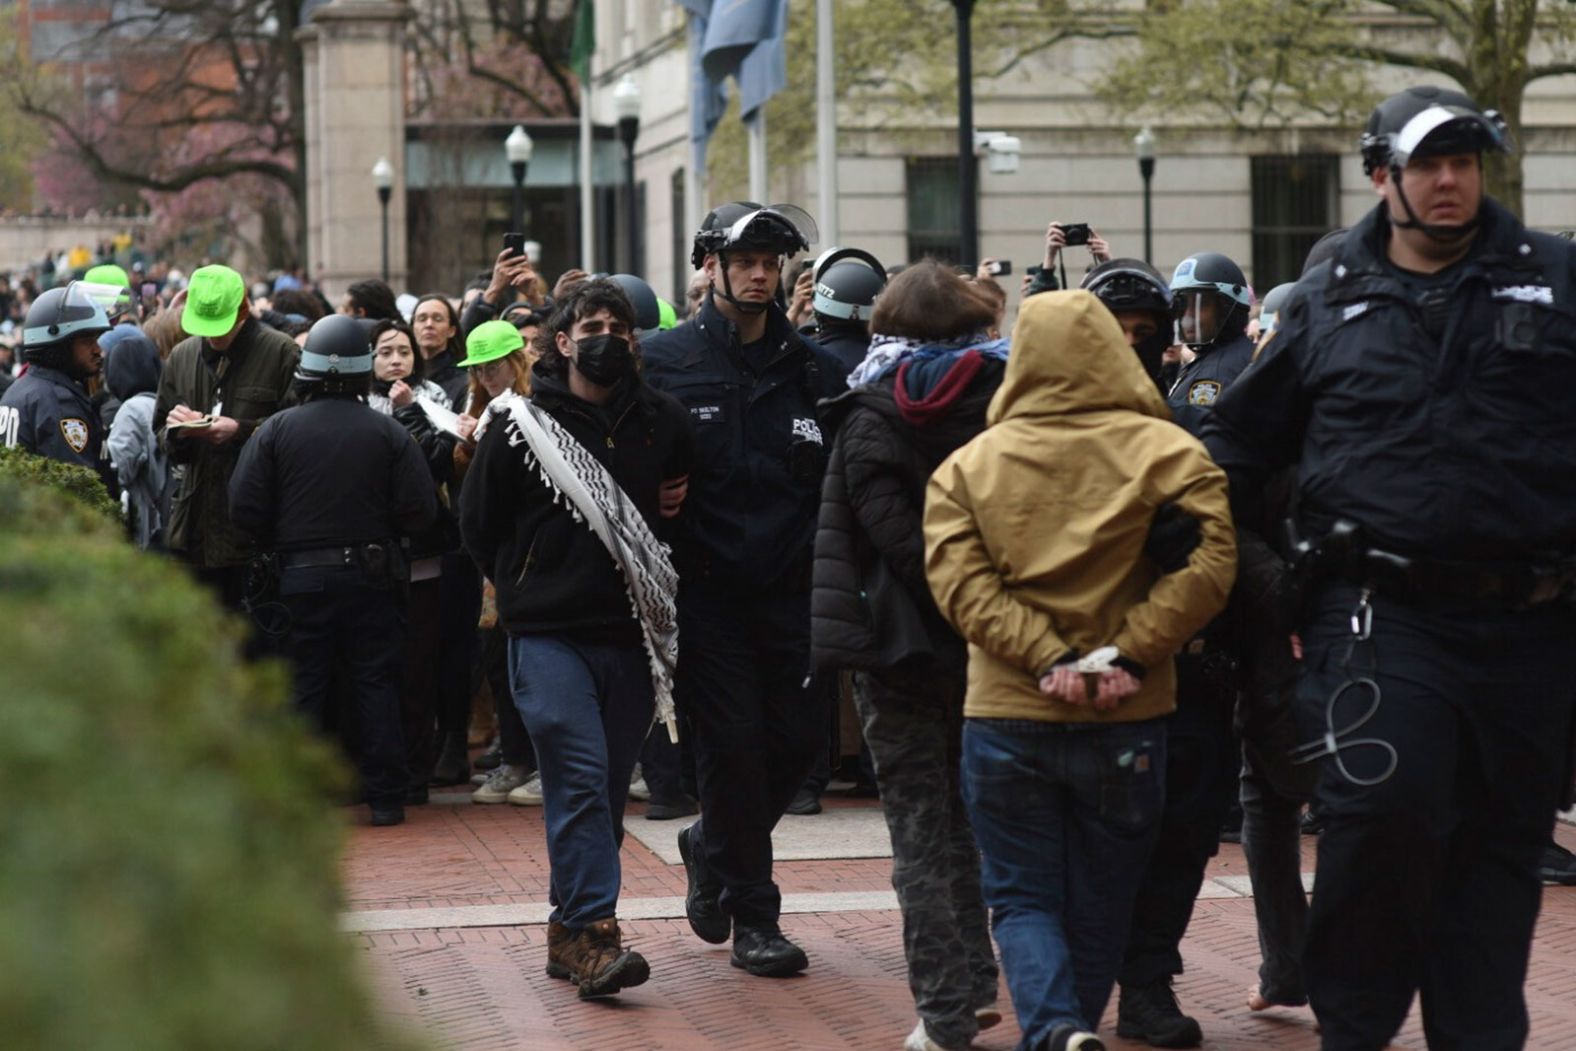 Police officers arrest pro-Palestinian demonstrators who had set up an encampment at Columbia University in New York on Thursday, April 18. <a href="https://www.cnn.com/2024/04/18/us/nypd-disperses-pro-palestinian-protest-columbia-university/index.html" target="_blank">More than 100 people were arrested</a> on suspicion of criminal trespass, according to a law enforcement official, as police dispersed the protest, which began a day earlier as the university's president <a href="https://www.cnn.com/business/live-news/columbia-antisemitism-house-testimony/index.html" target="_blank">testified before a House committee</a> about the school's response to antisemitism.